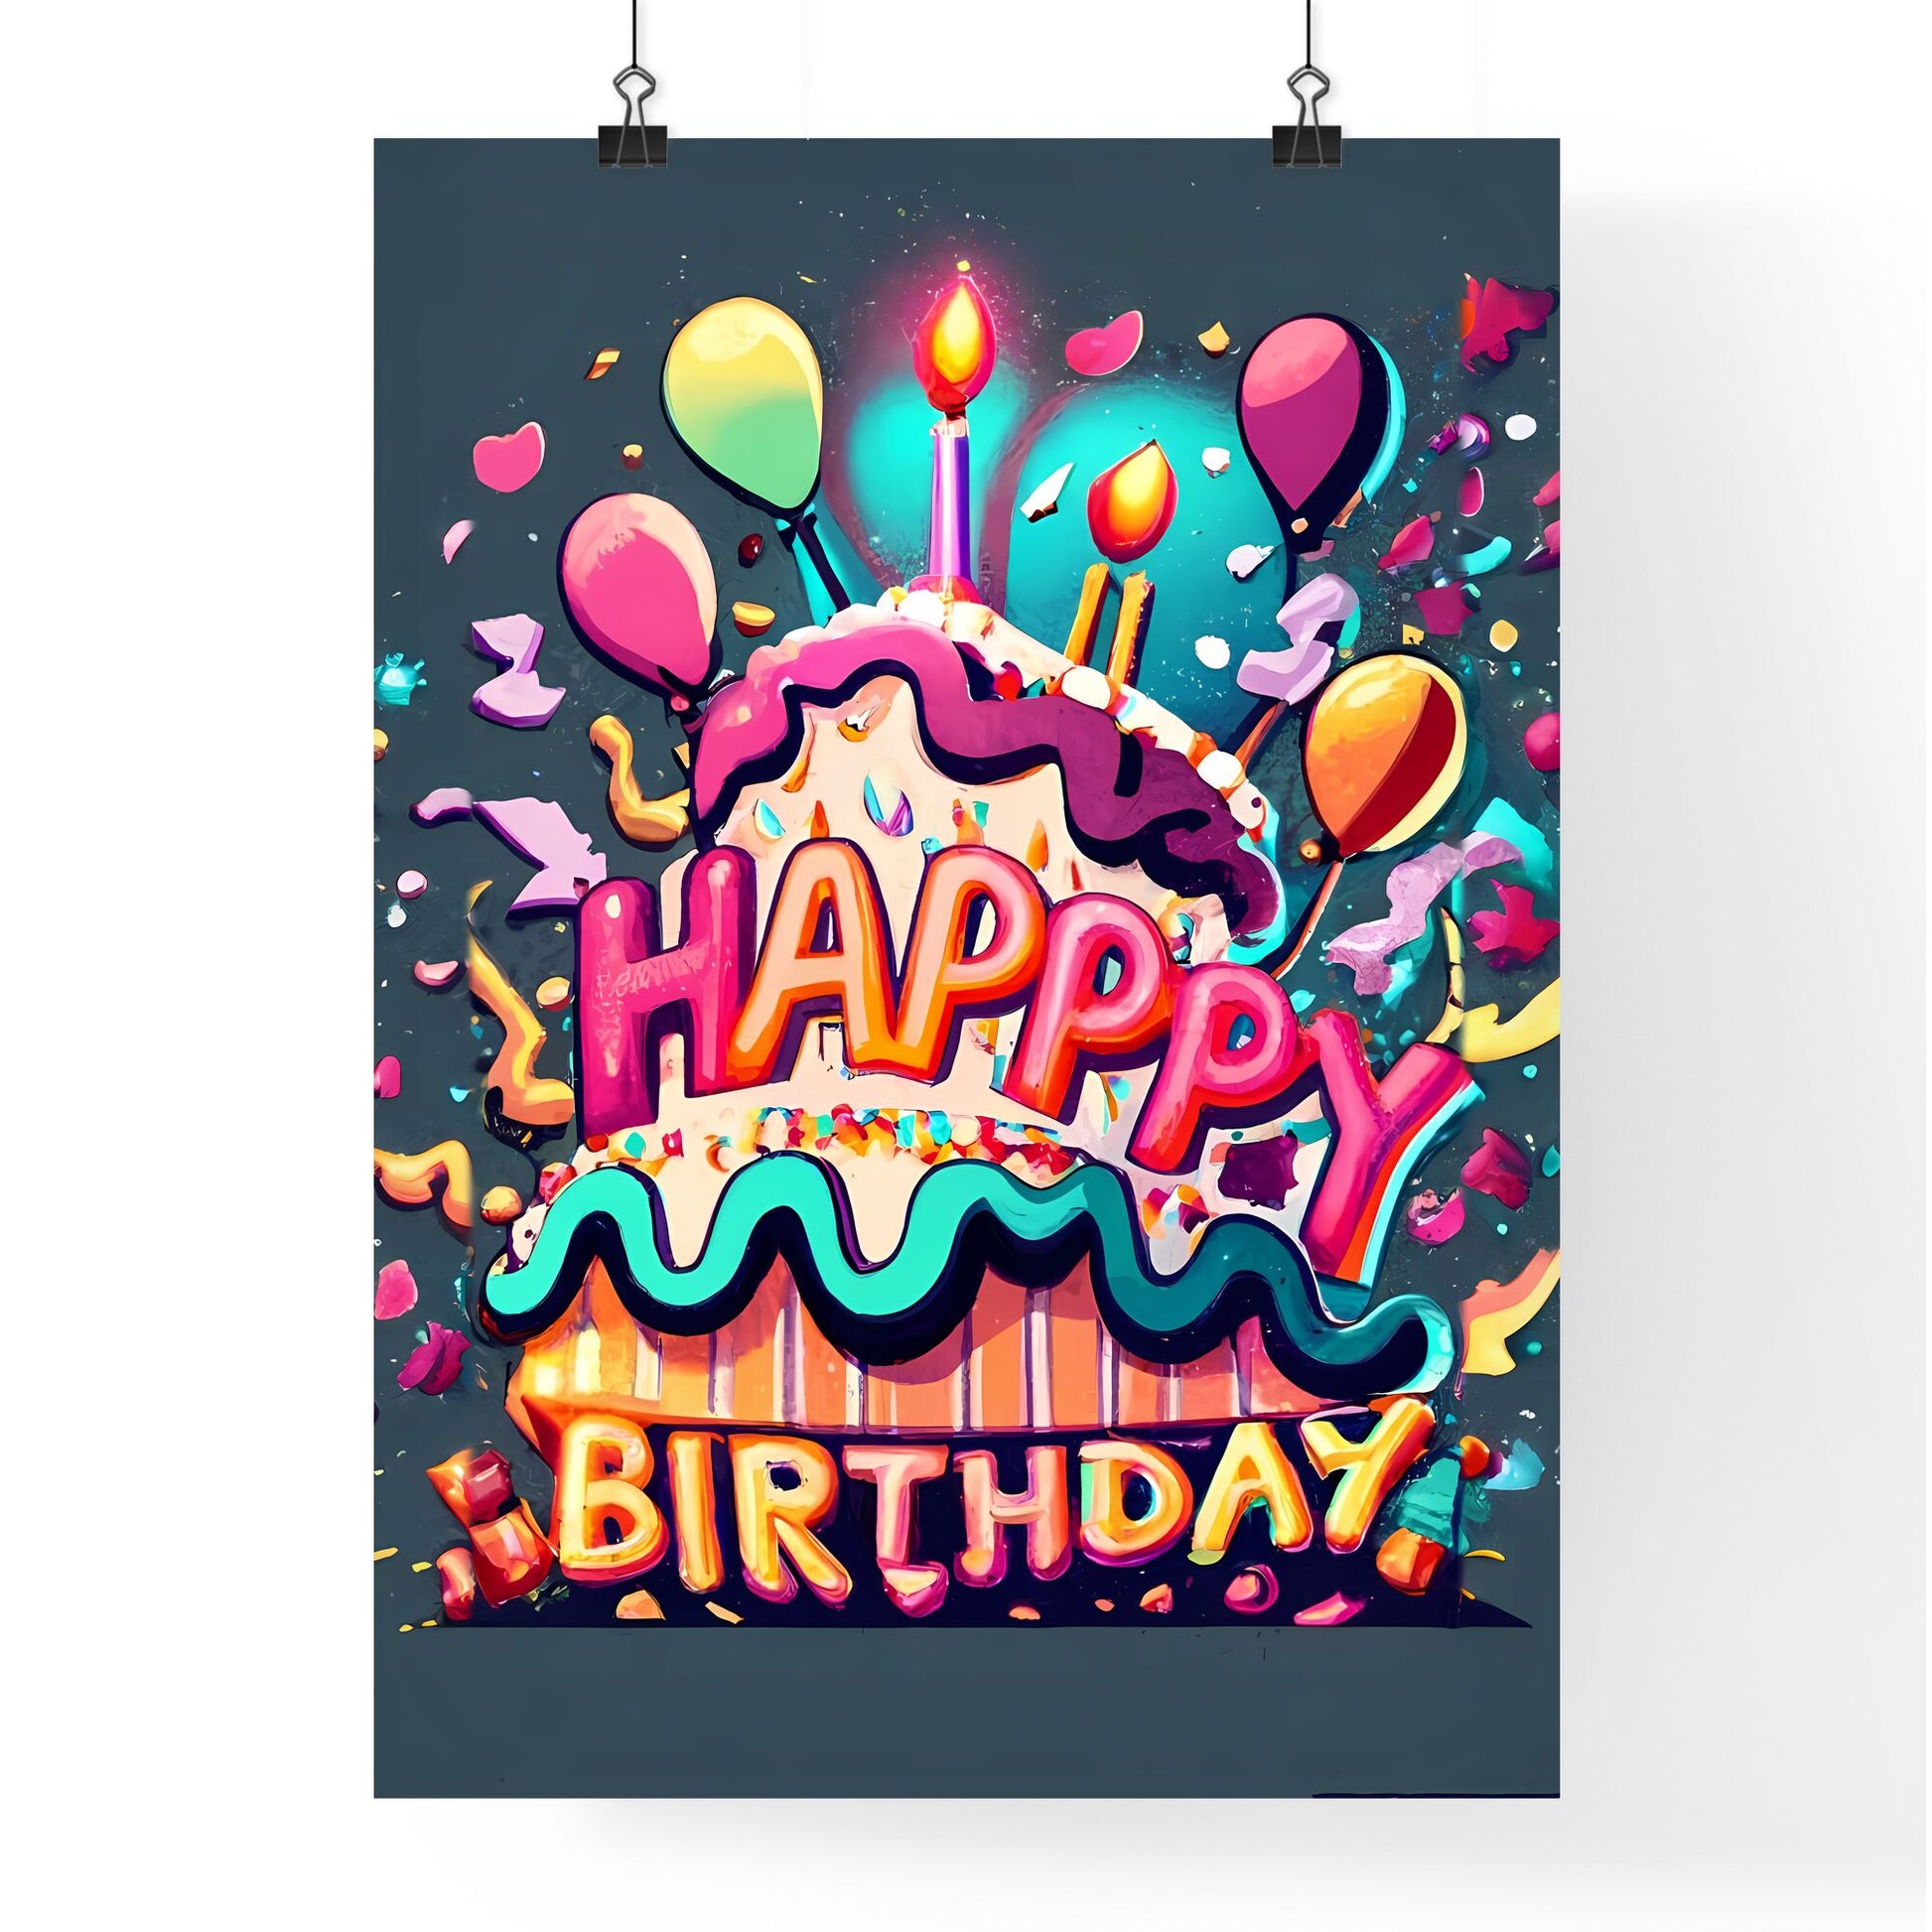 Happy Birthday - A Birthday Cake With Balloons And Confetti Art Print Default Title